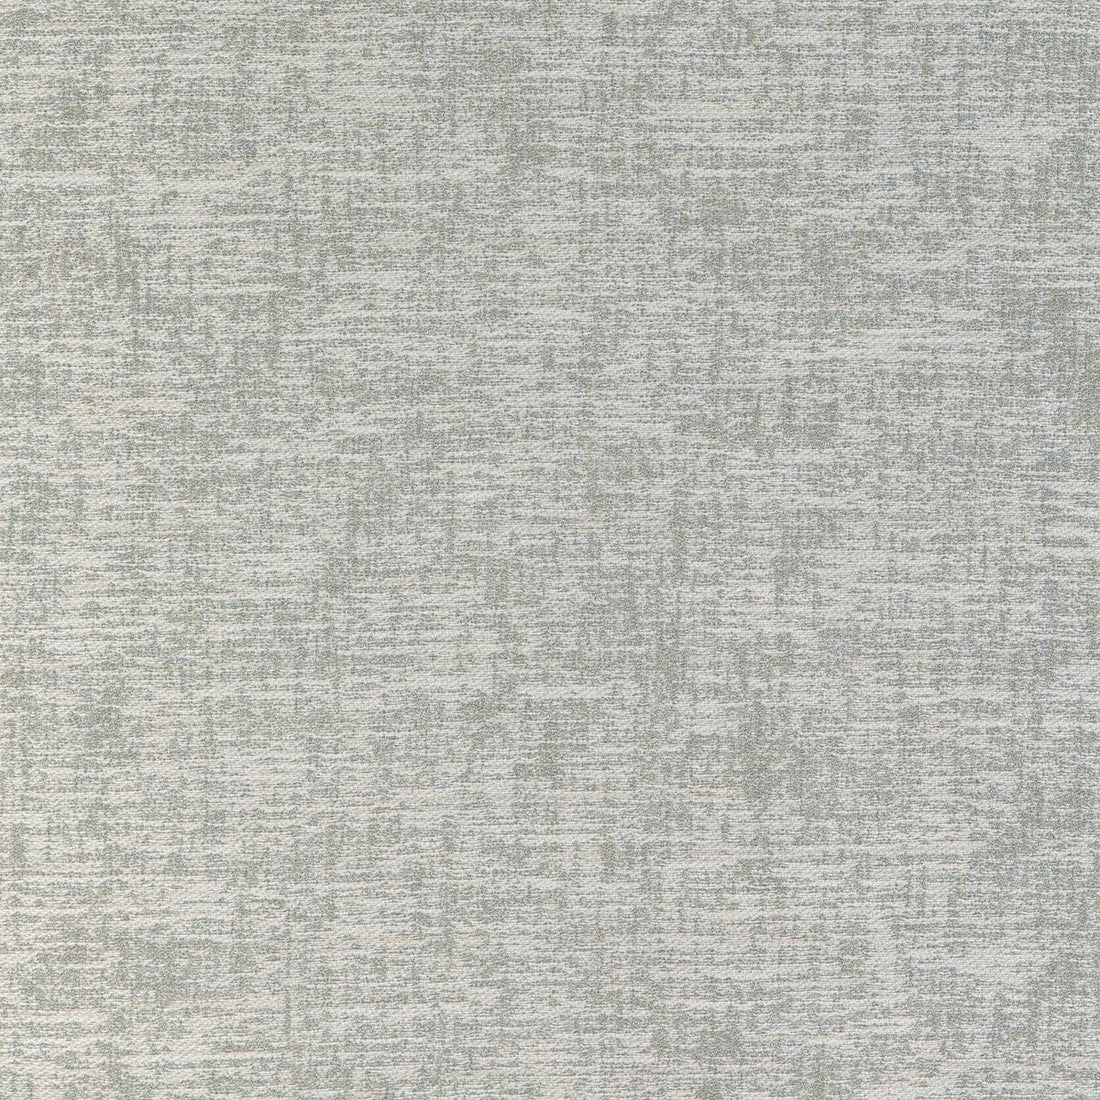 Seadrift fabric in seaglass color - pattern 36919.1511.0 - by Kravet Couture in the Riviera collection